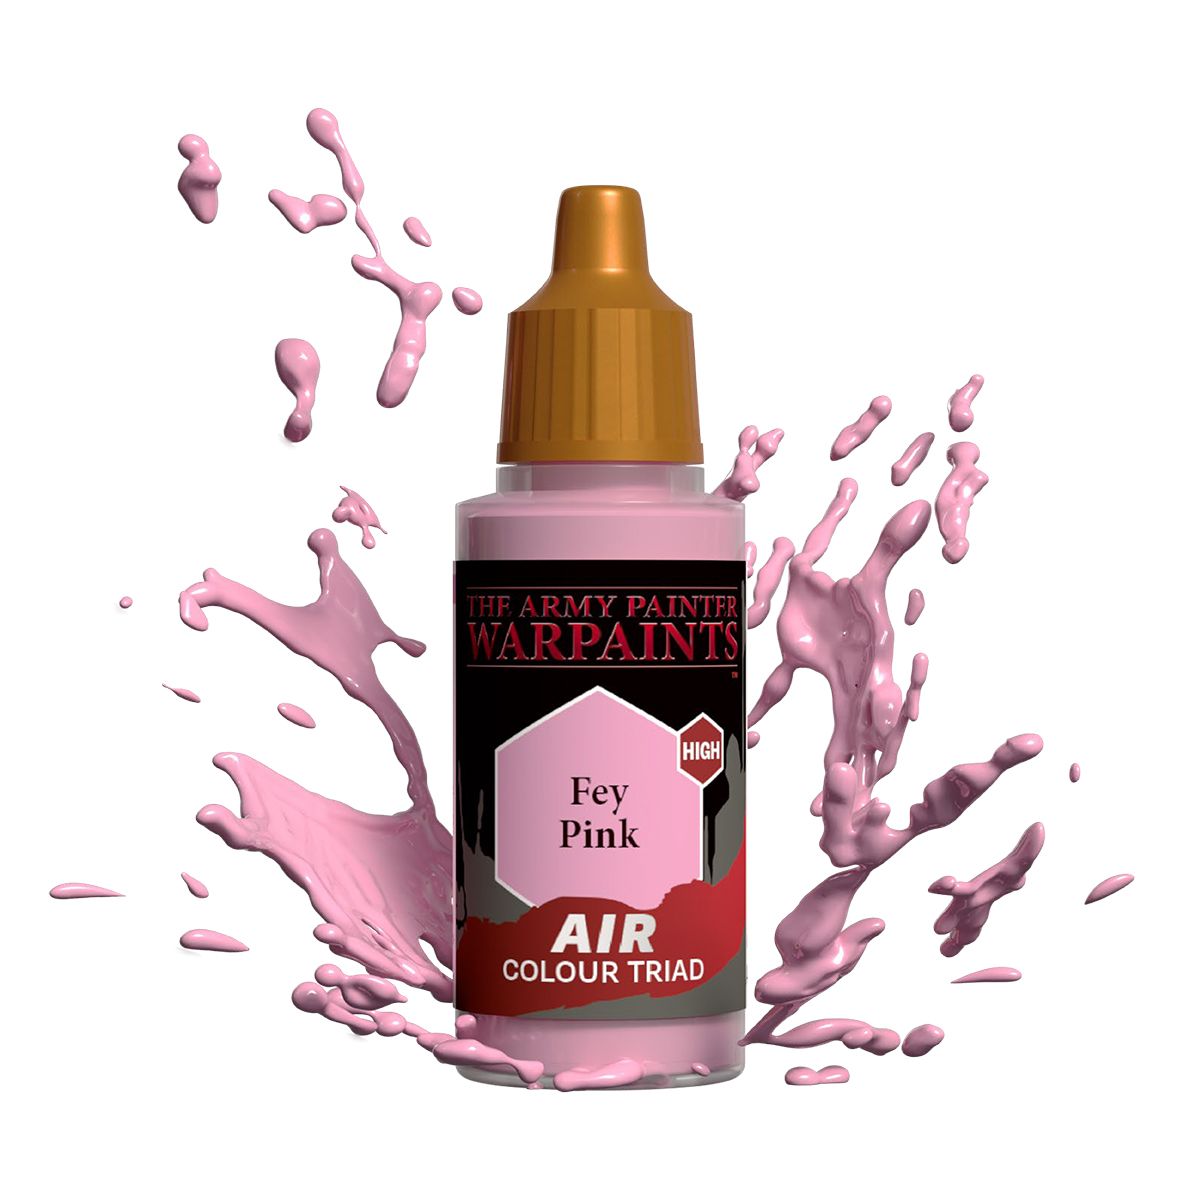 Army Painter Warpaints - Air Fey Pink Acrylic Paint 18ml